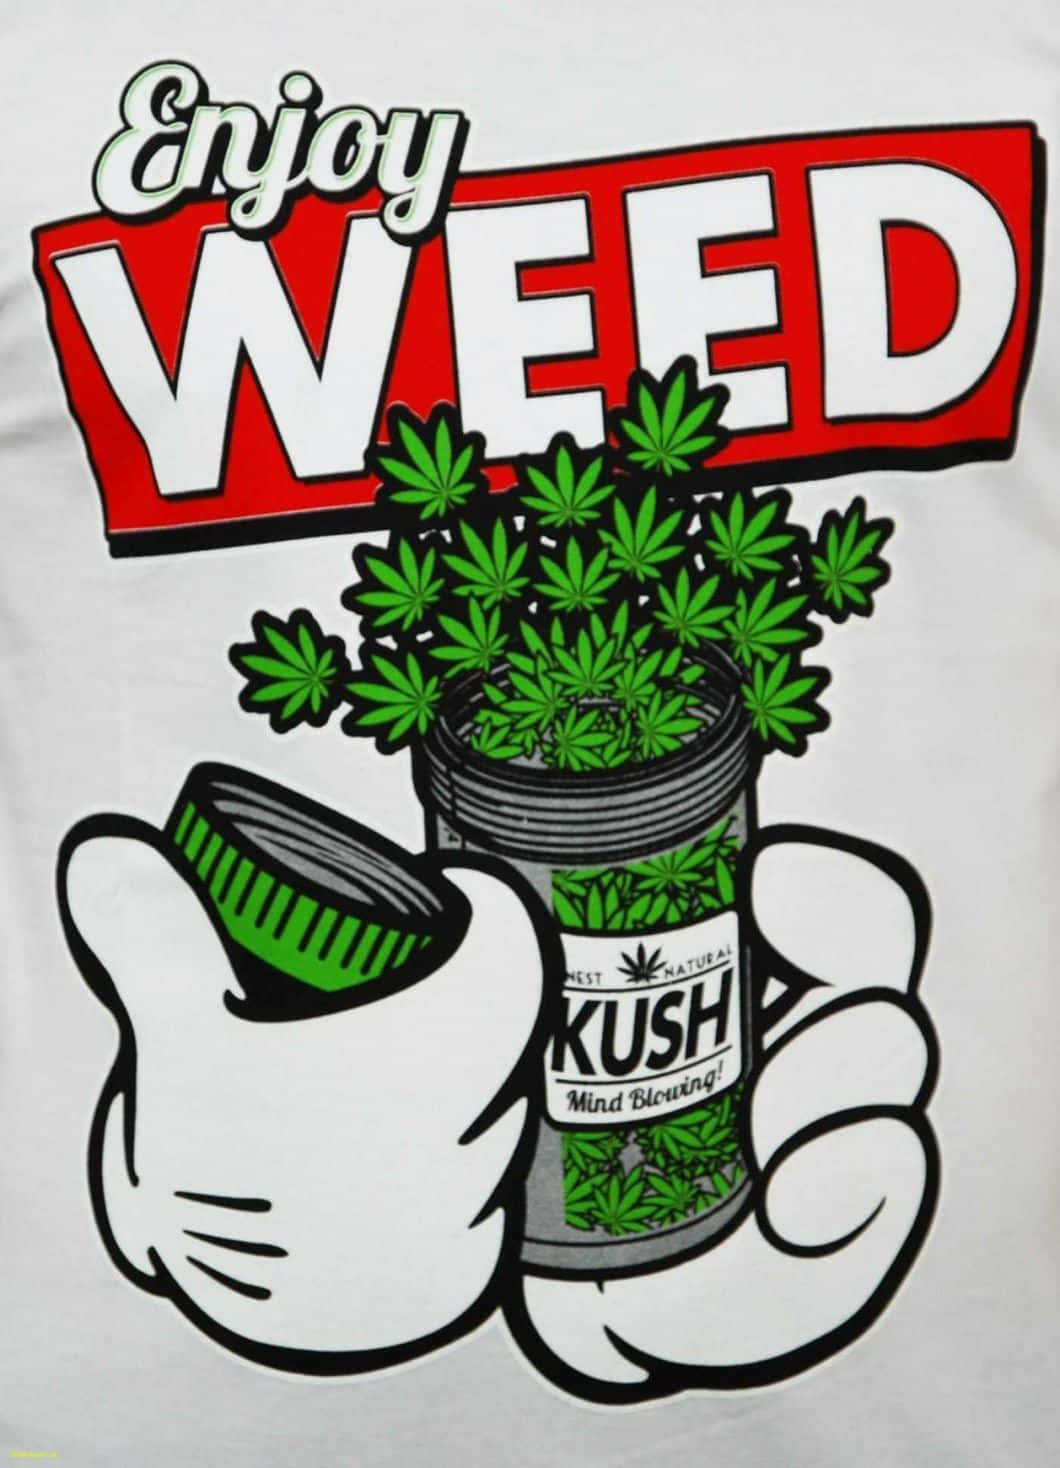 Show your confidence in yourself, living life as if you are always at the top of your game, with Shit Dope Weed. Wallpaper